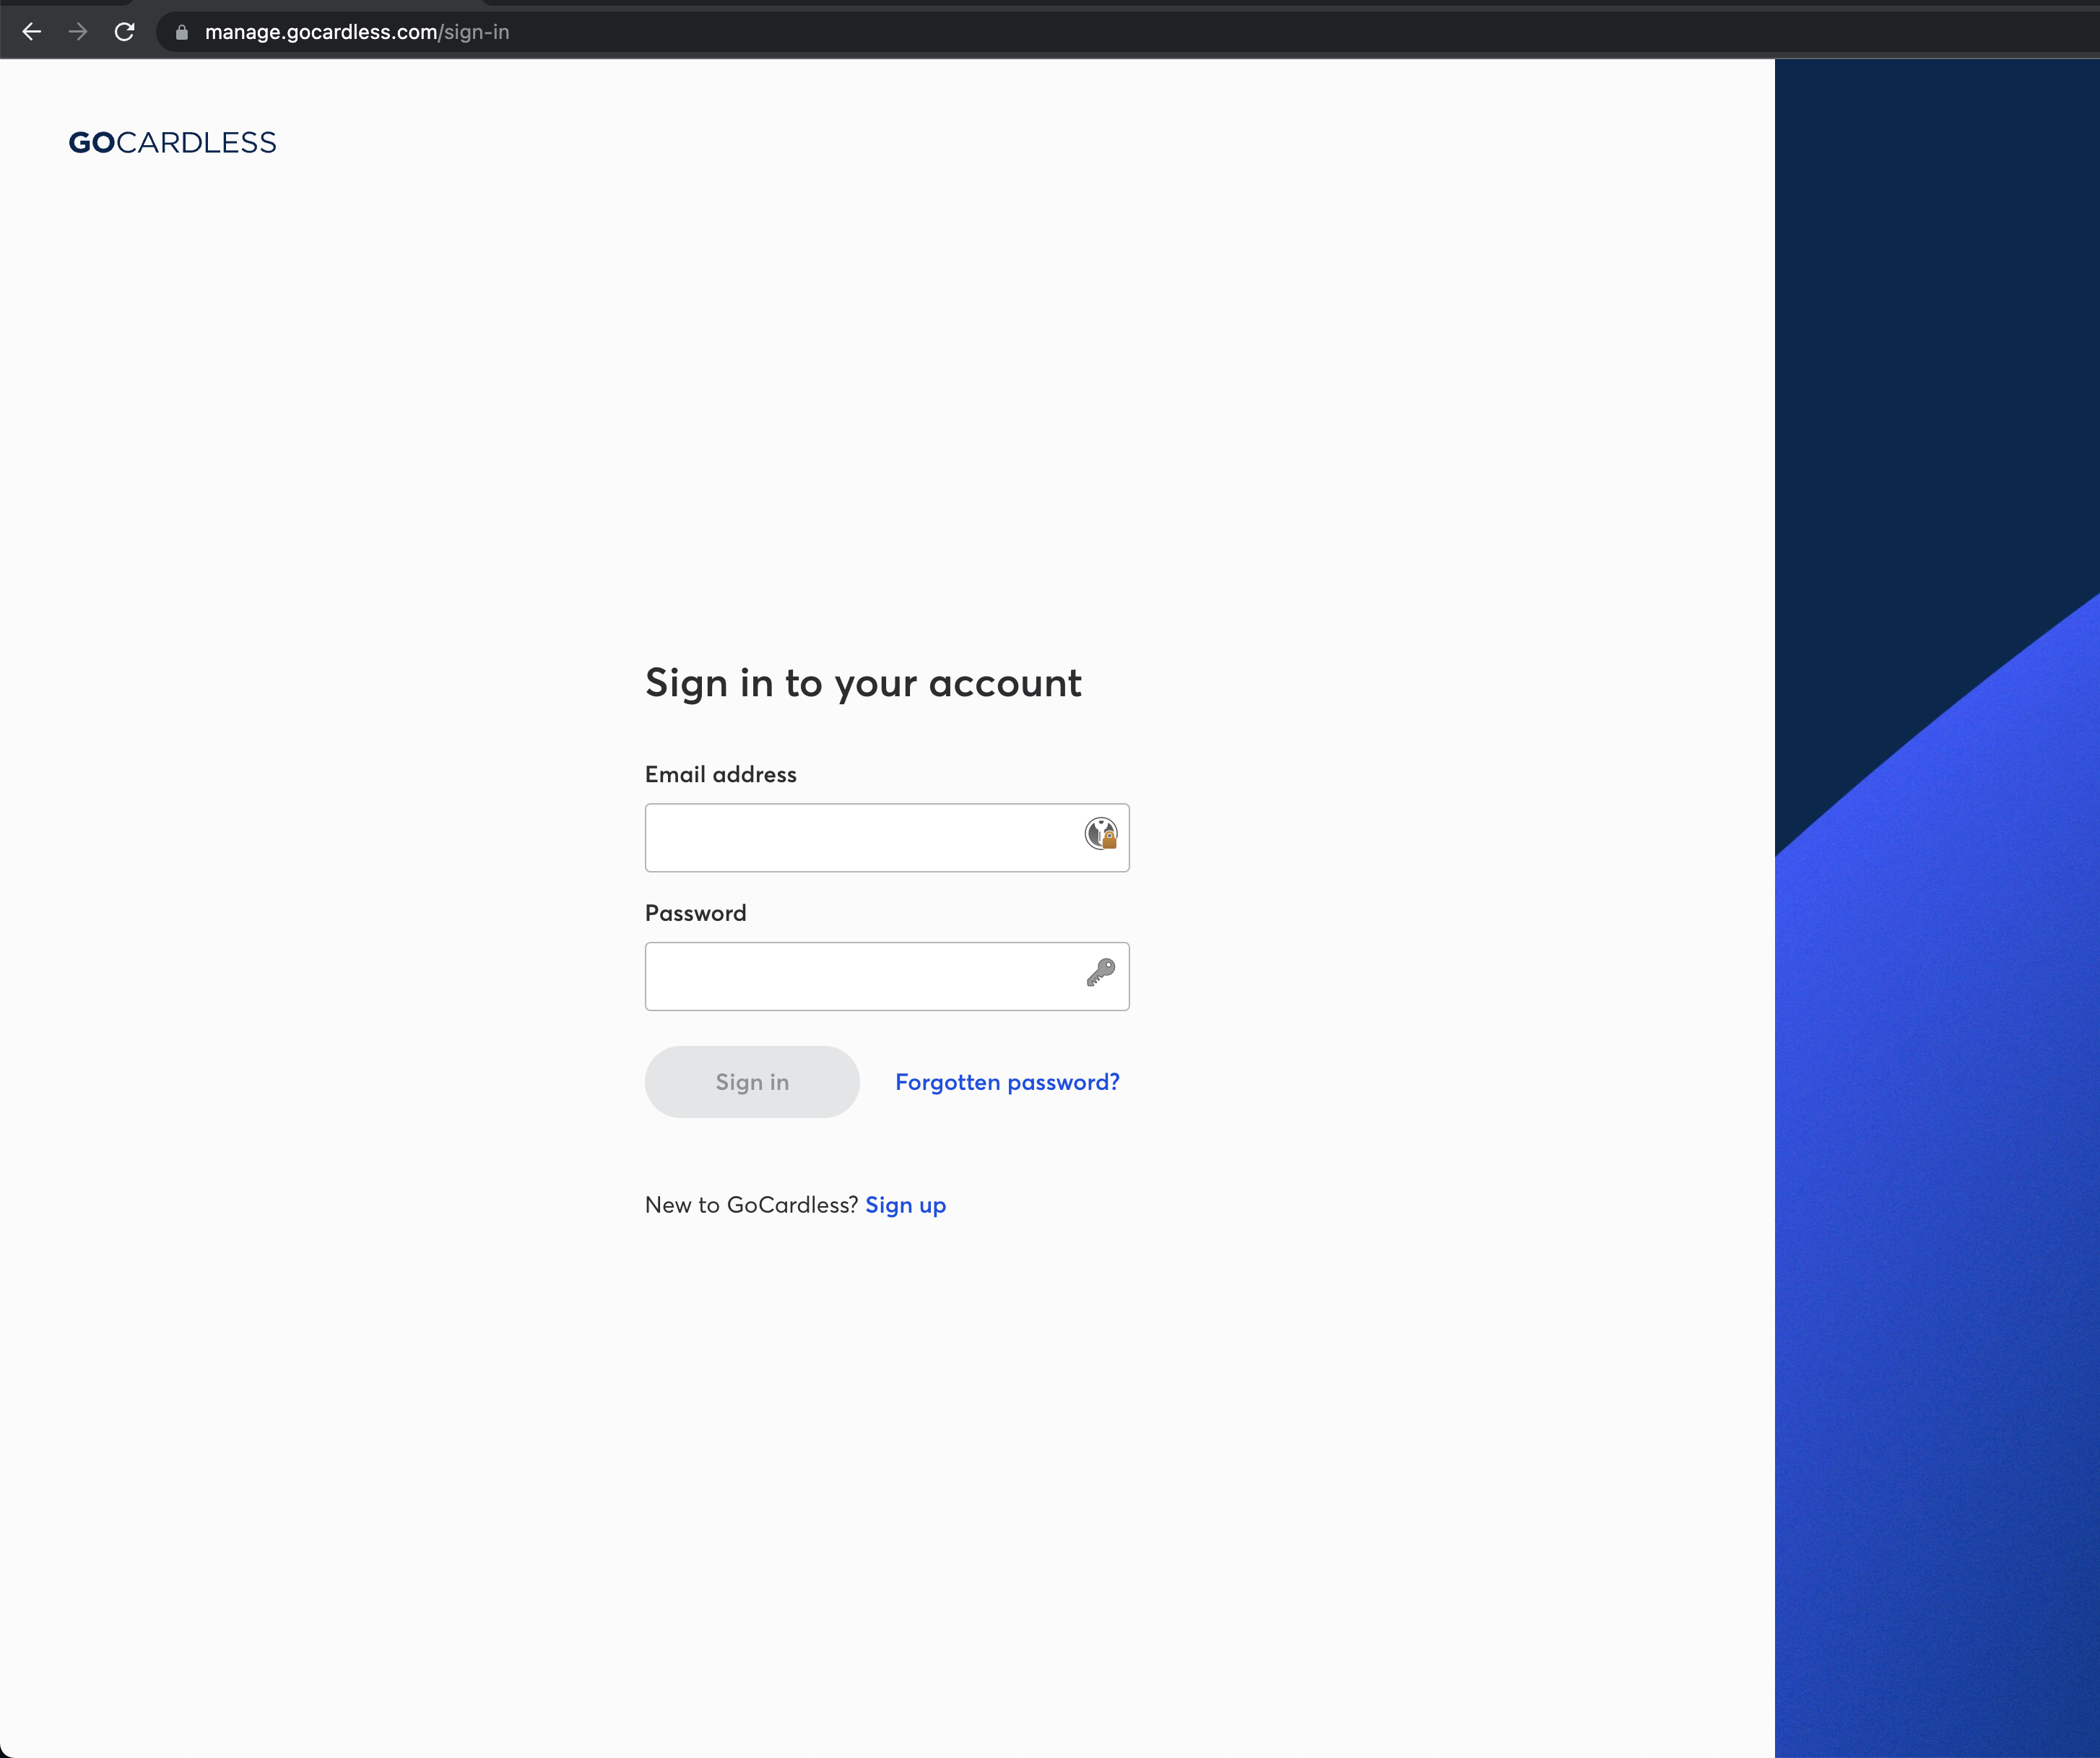 Log into your GoCardless account and Go to Developers > Create > Webhook endpoint (https://manage.gocardless.com/developers/webhook-endpoints)